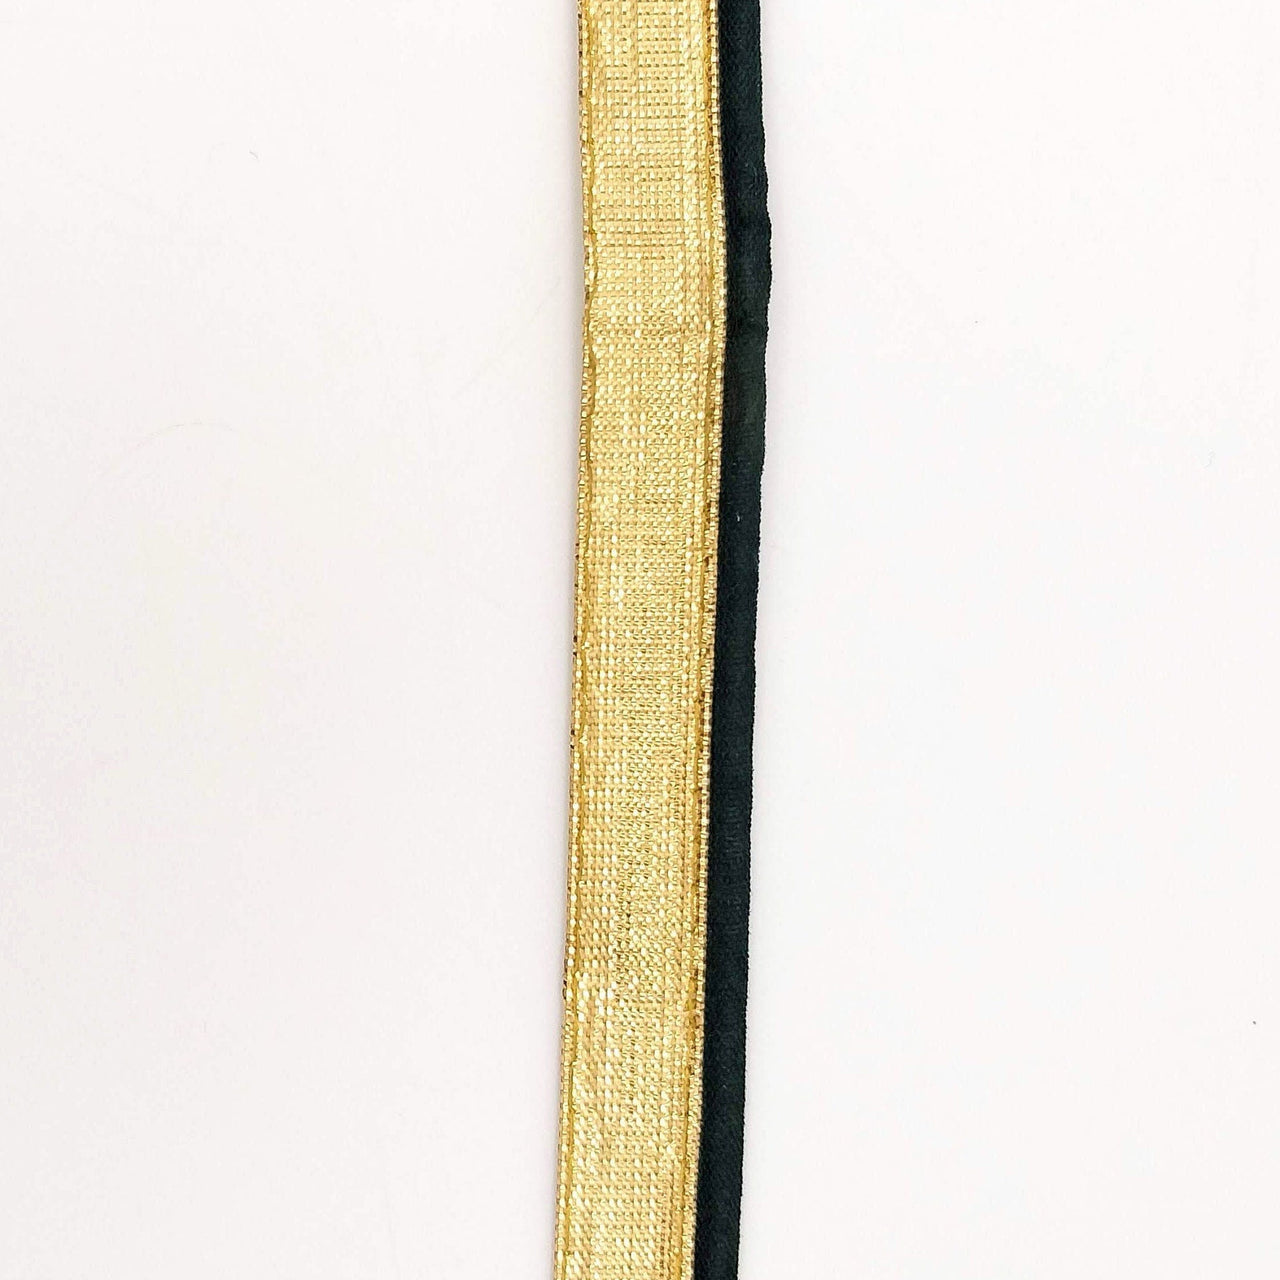 3 Yards, Flanged Insertion Gold Fabric Trim With Black Piping, 15mm Cord piping Trim Decorative Sewing Edge Trim Flanged Piping Cord